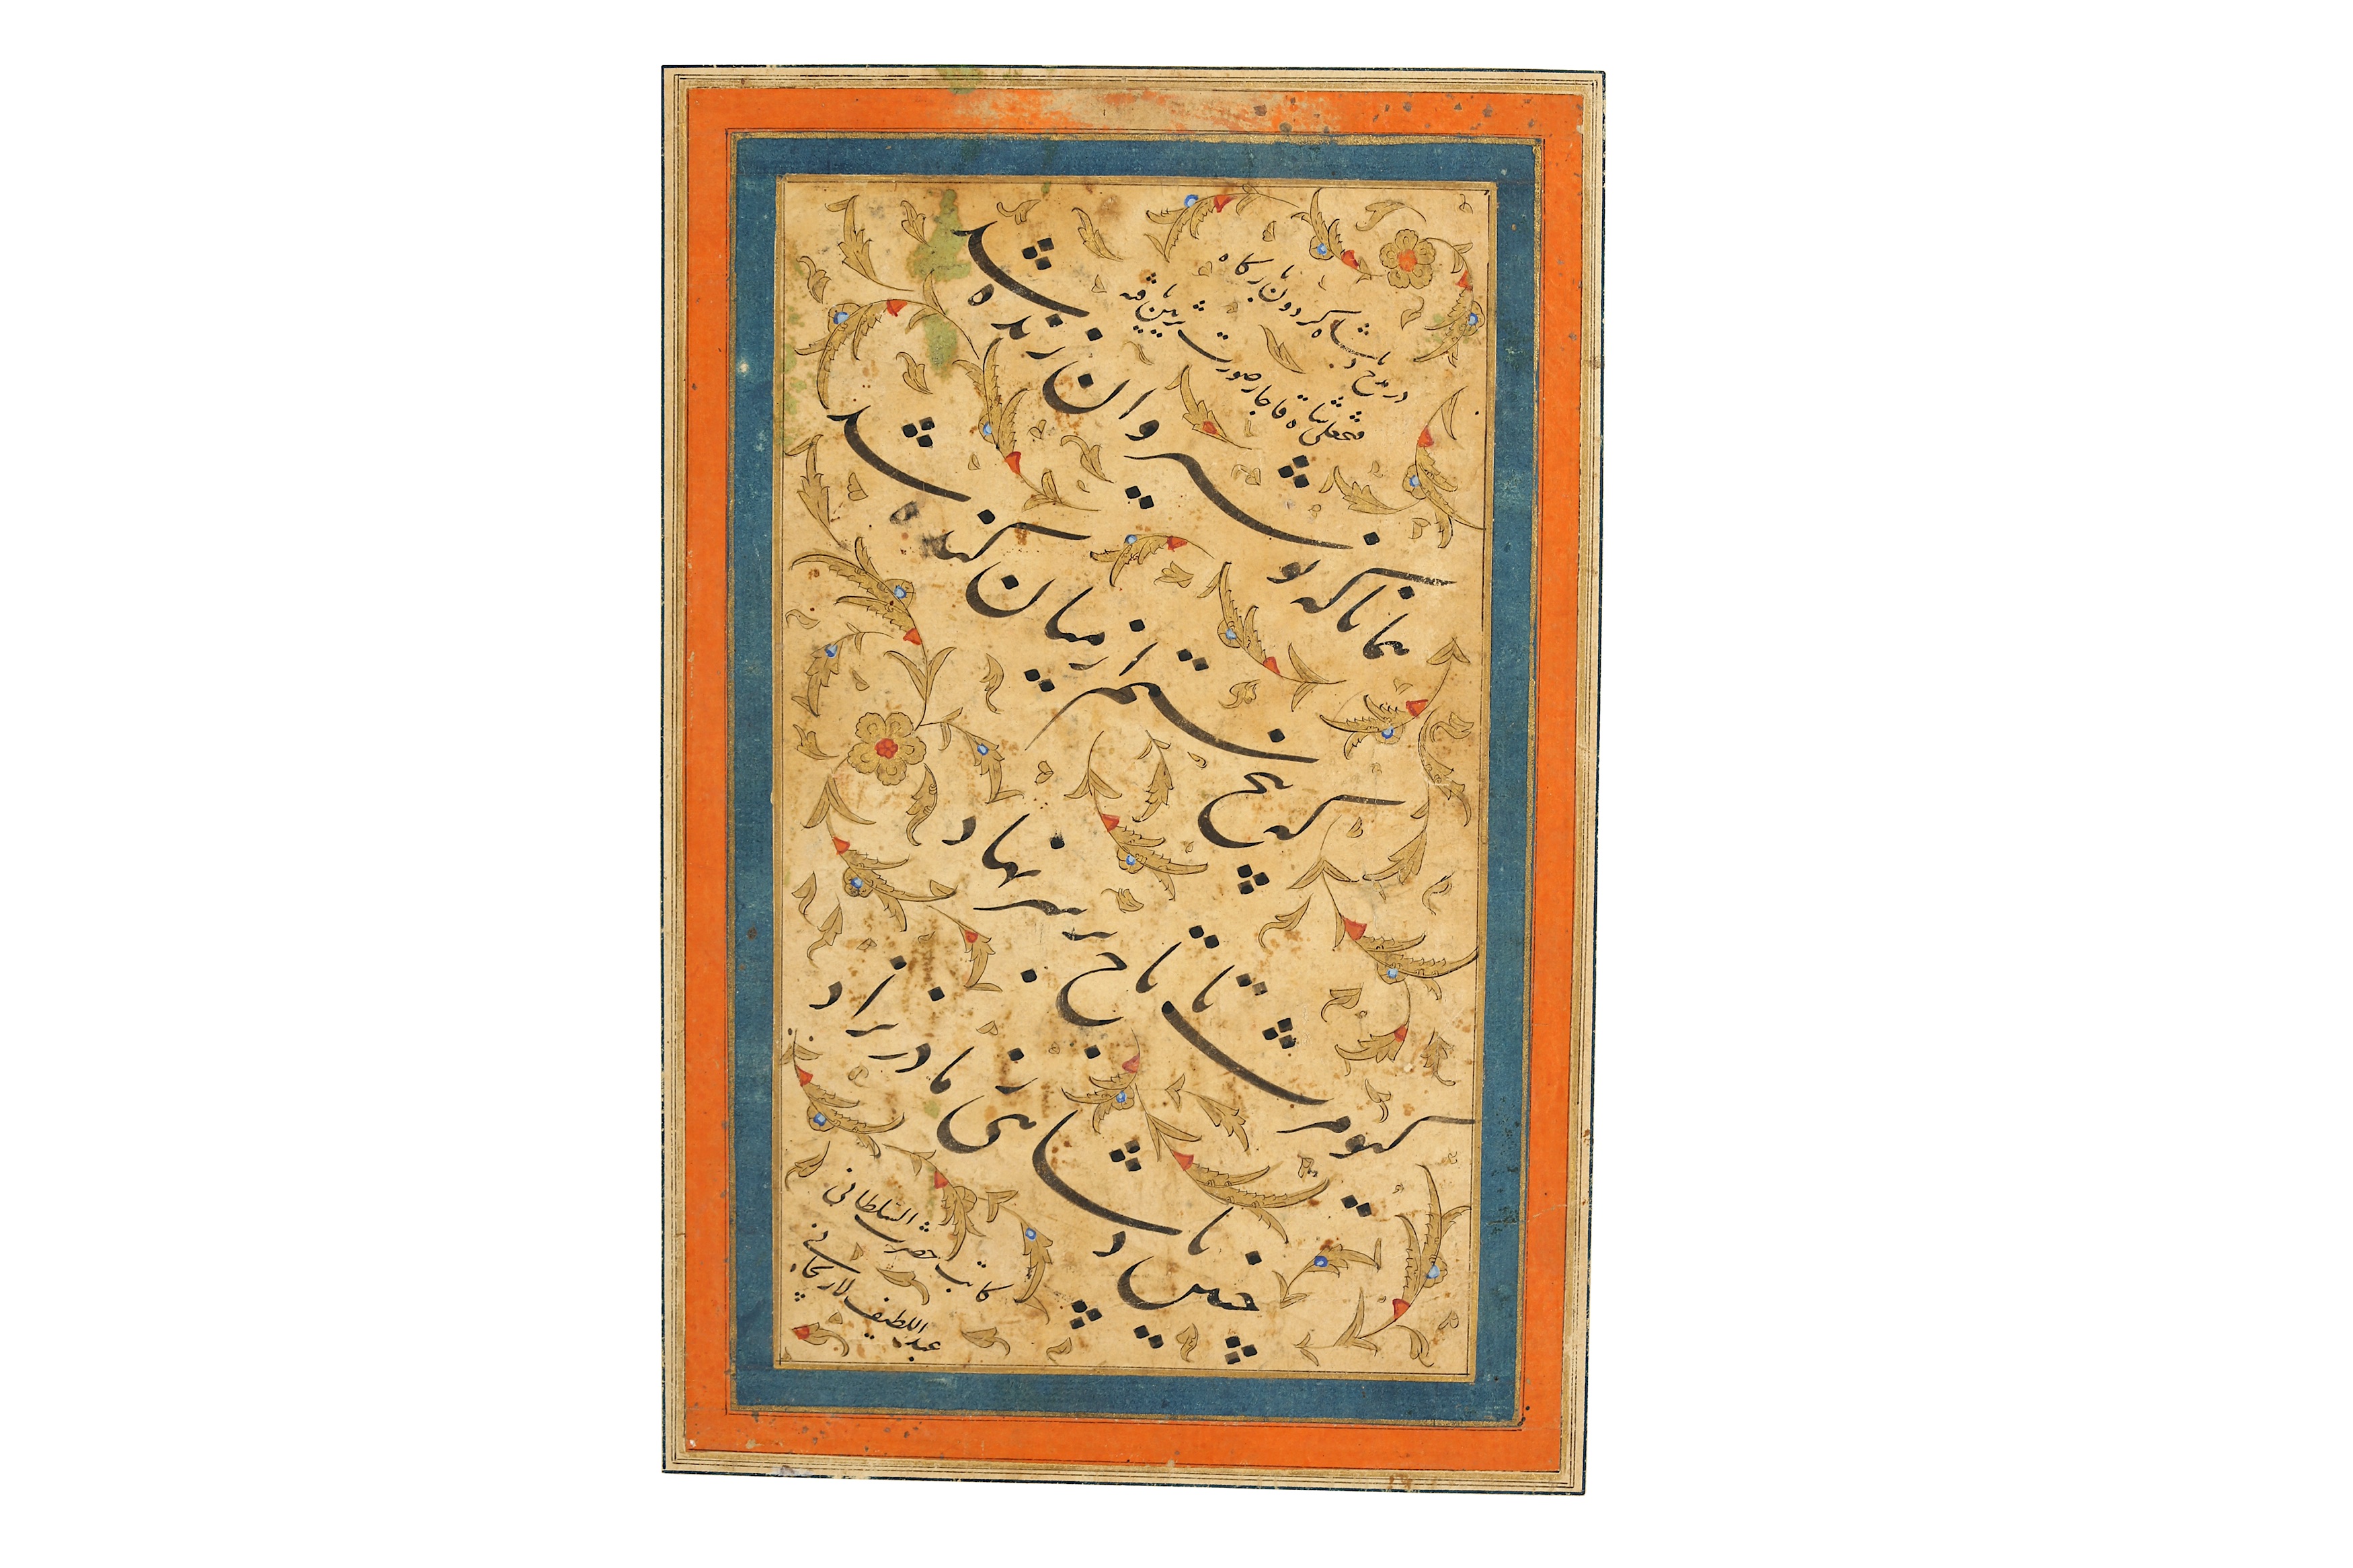 A PERSIAN CALLIGRAPHIC COMPOSITION PROPERTY OF THE LATE BRUNO CARUSO (1927 - 2018) COLLECTION - Image 2 of 4